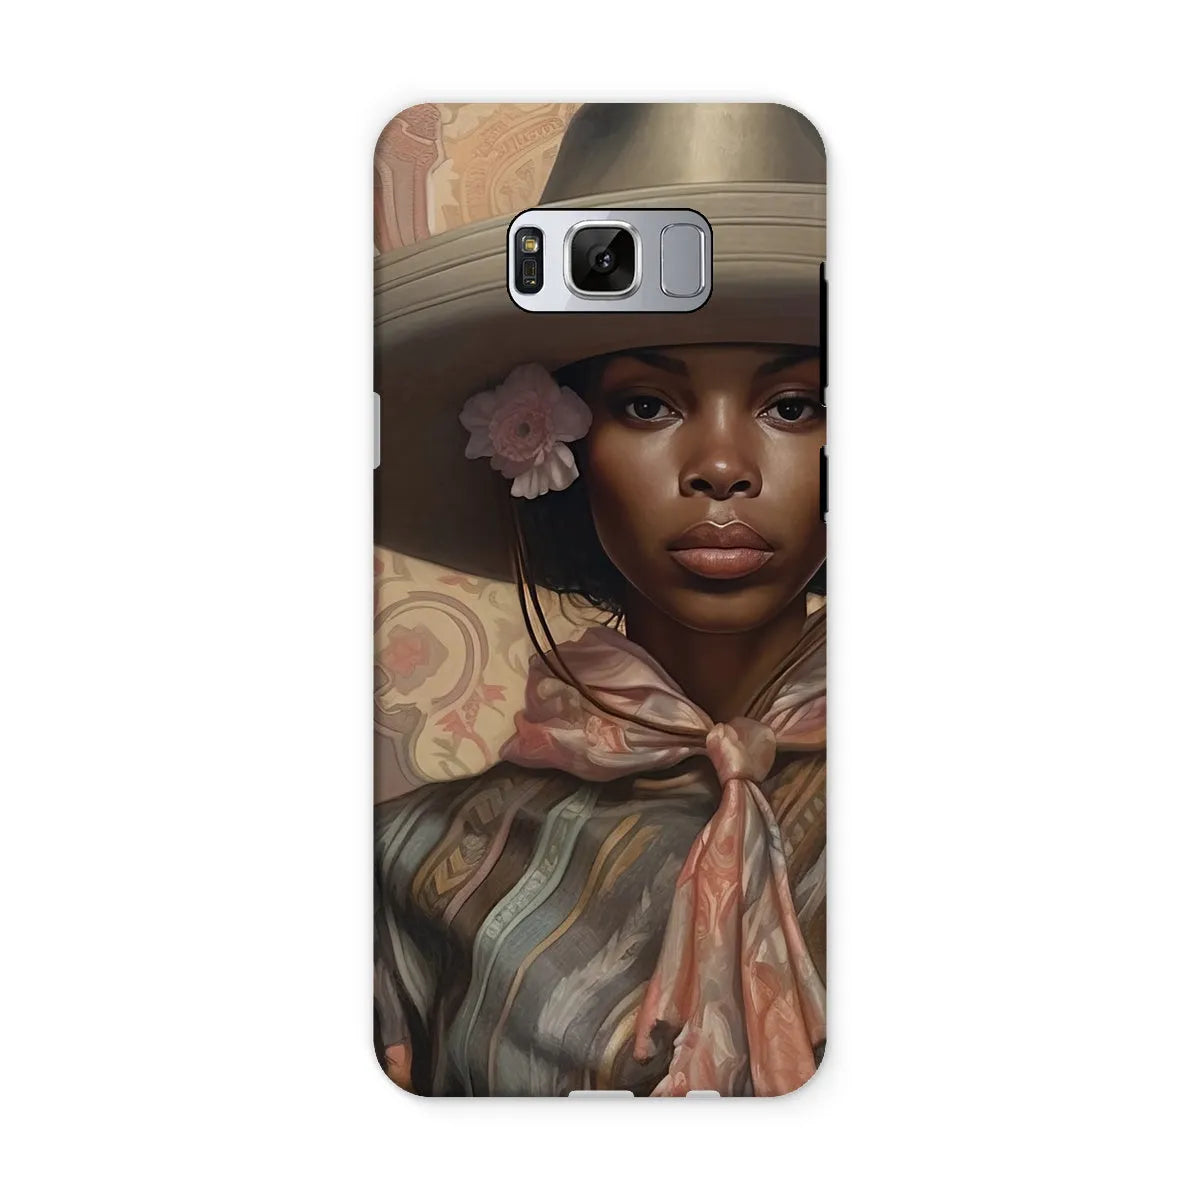 Sadie The Lesbian Cowgirl - Sapphic Art Phone Case - Samsung Galaxy S8 / Matte - Mobile Phone Cases - Aesthetic Art